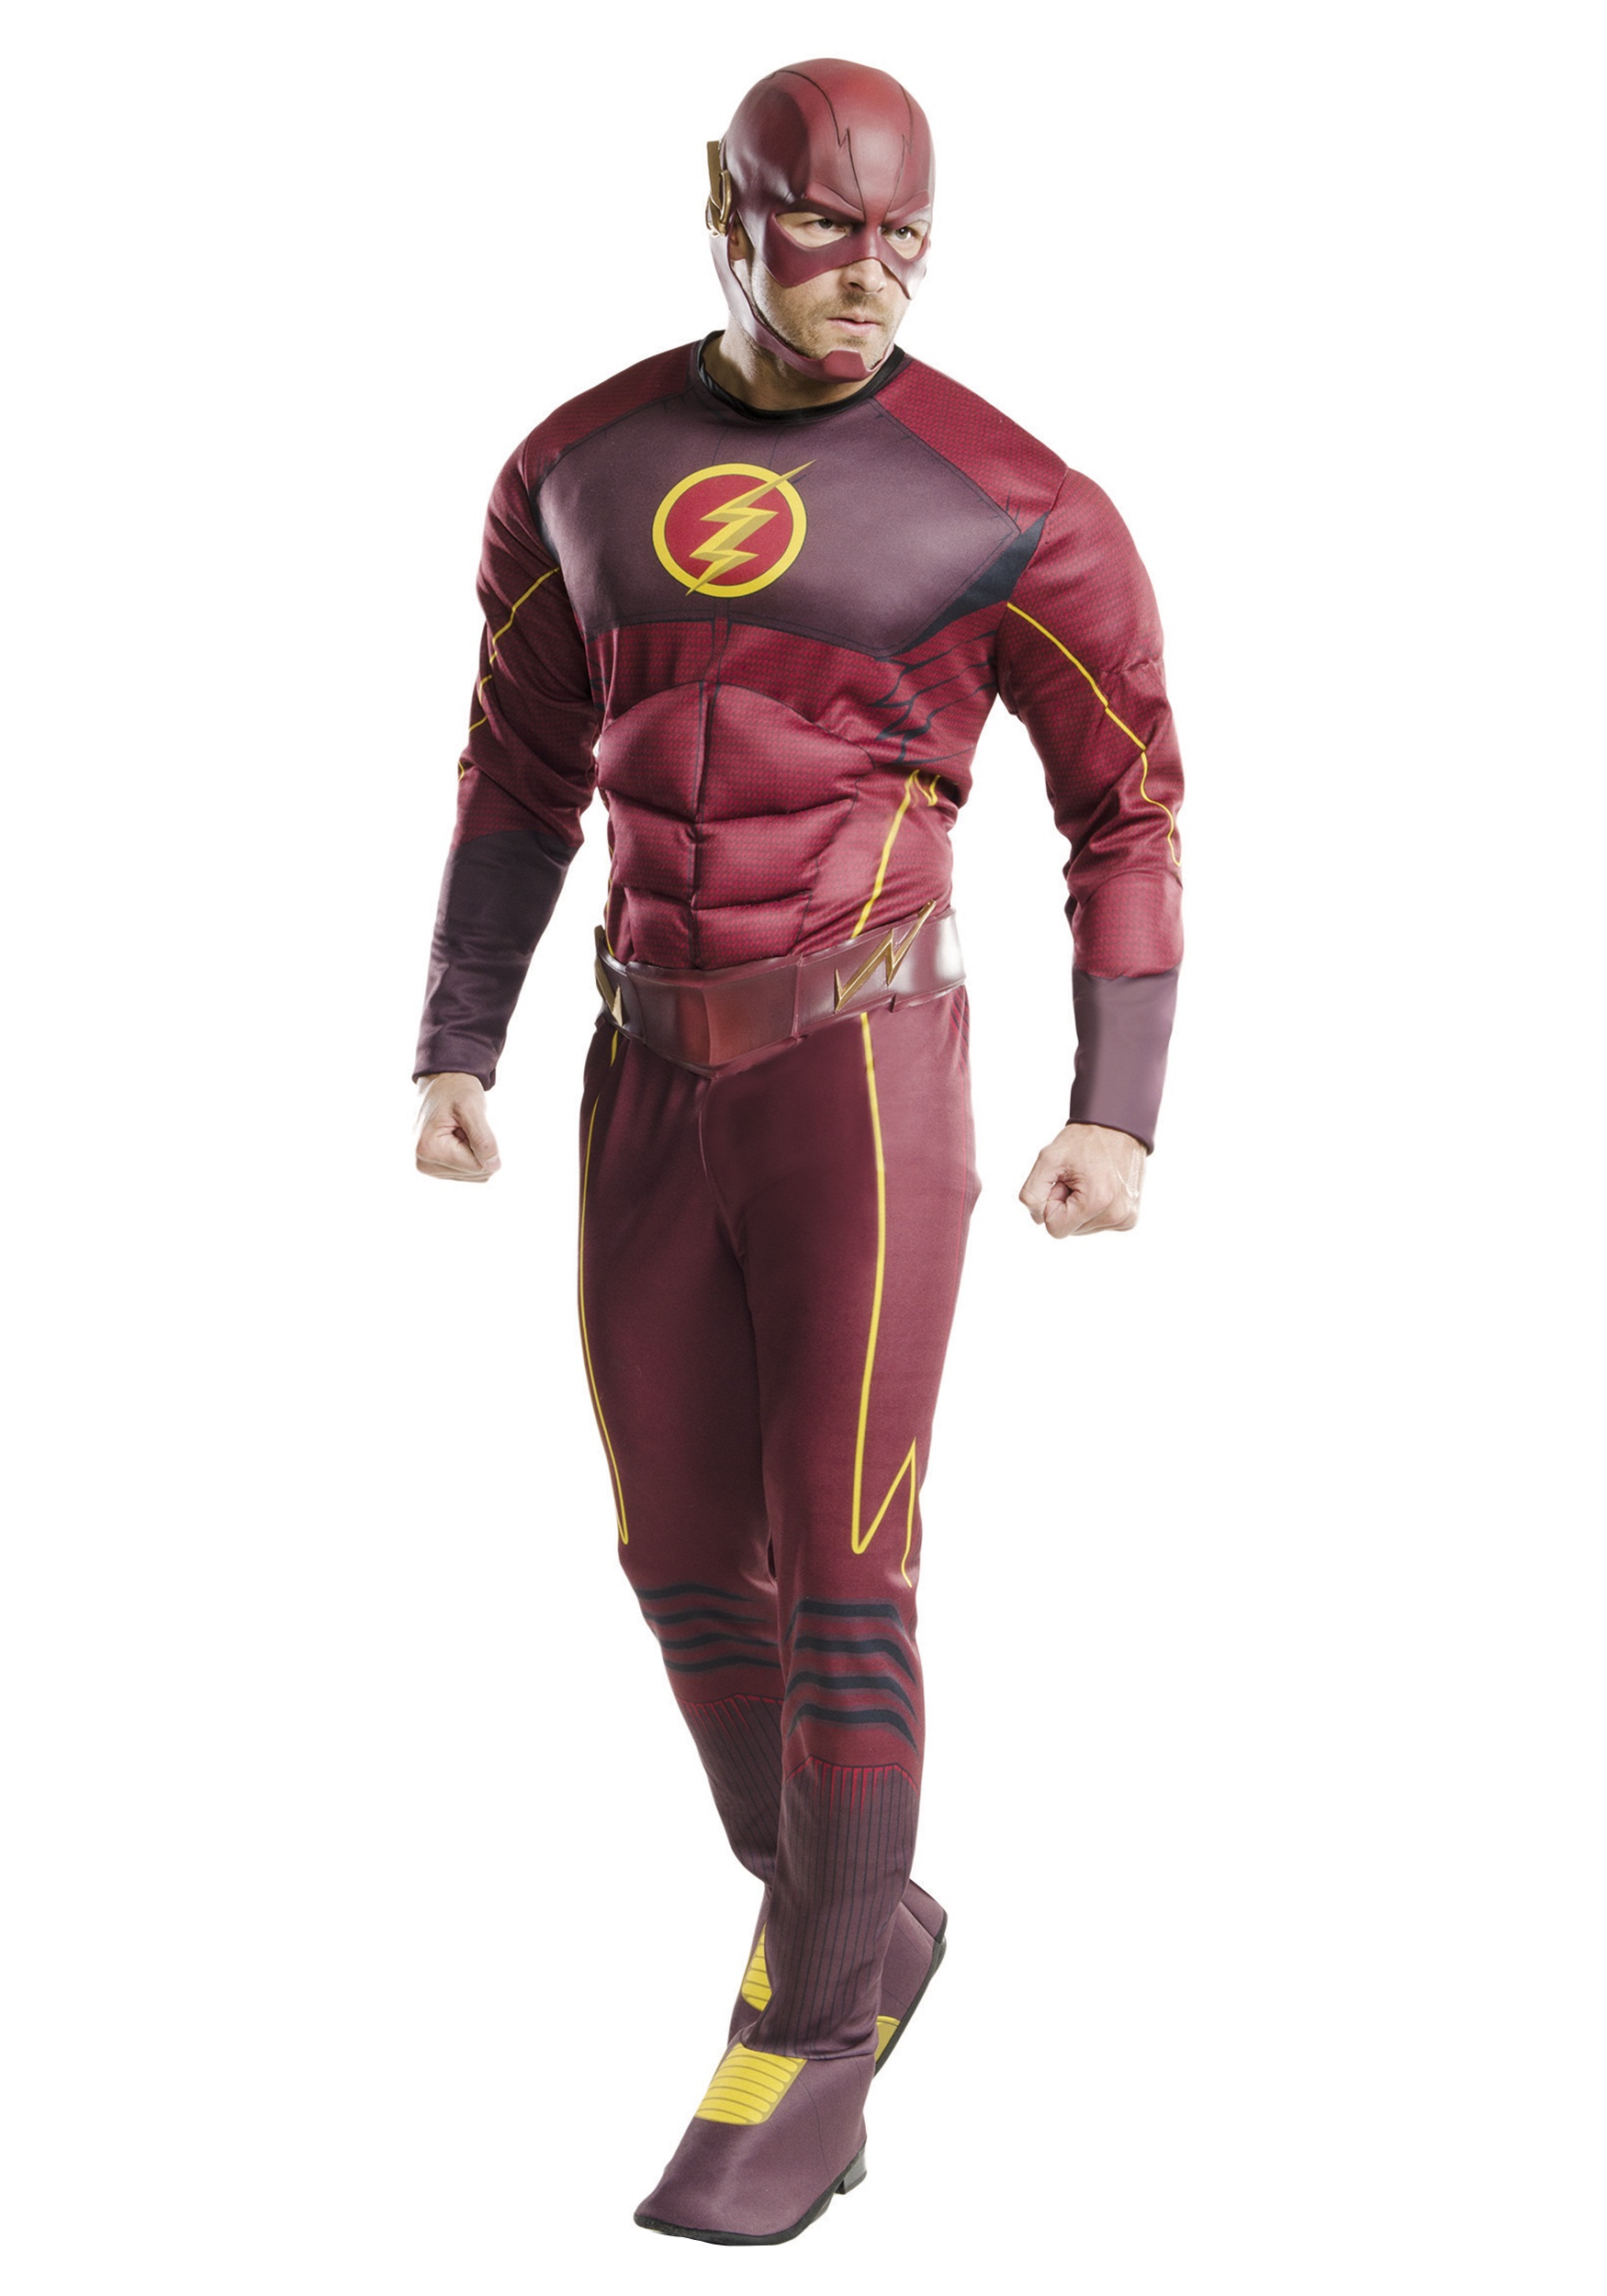 Image of Adult Deluxe The Flash Costume | DC Comics Costumes ID RU810394-ST